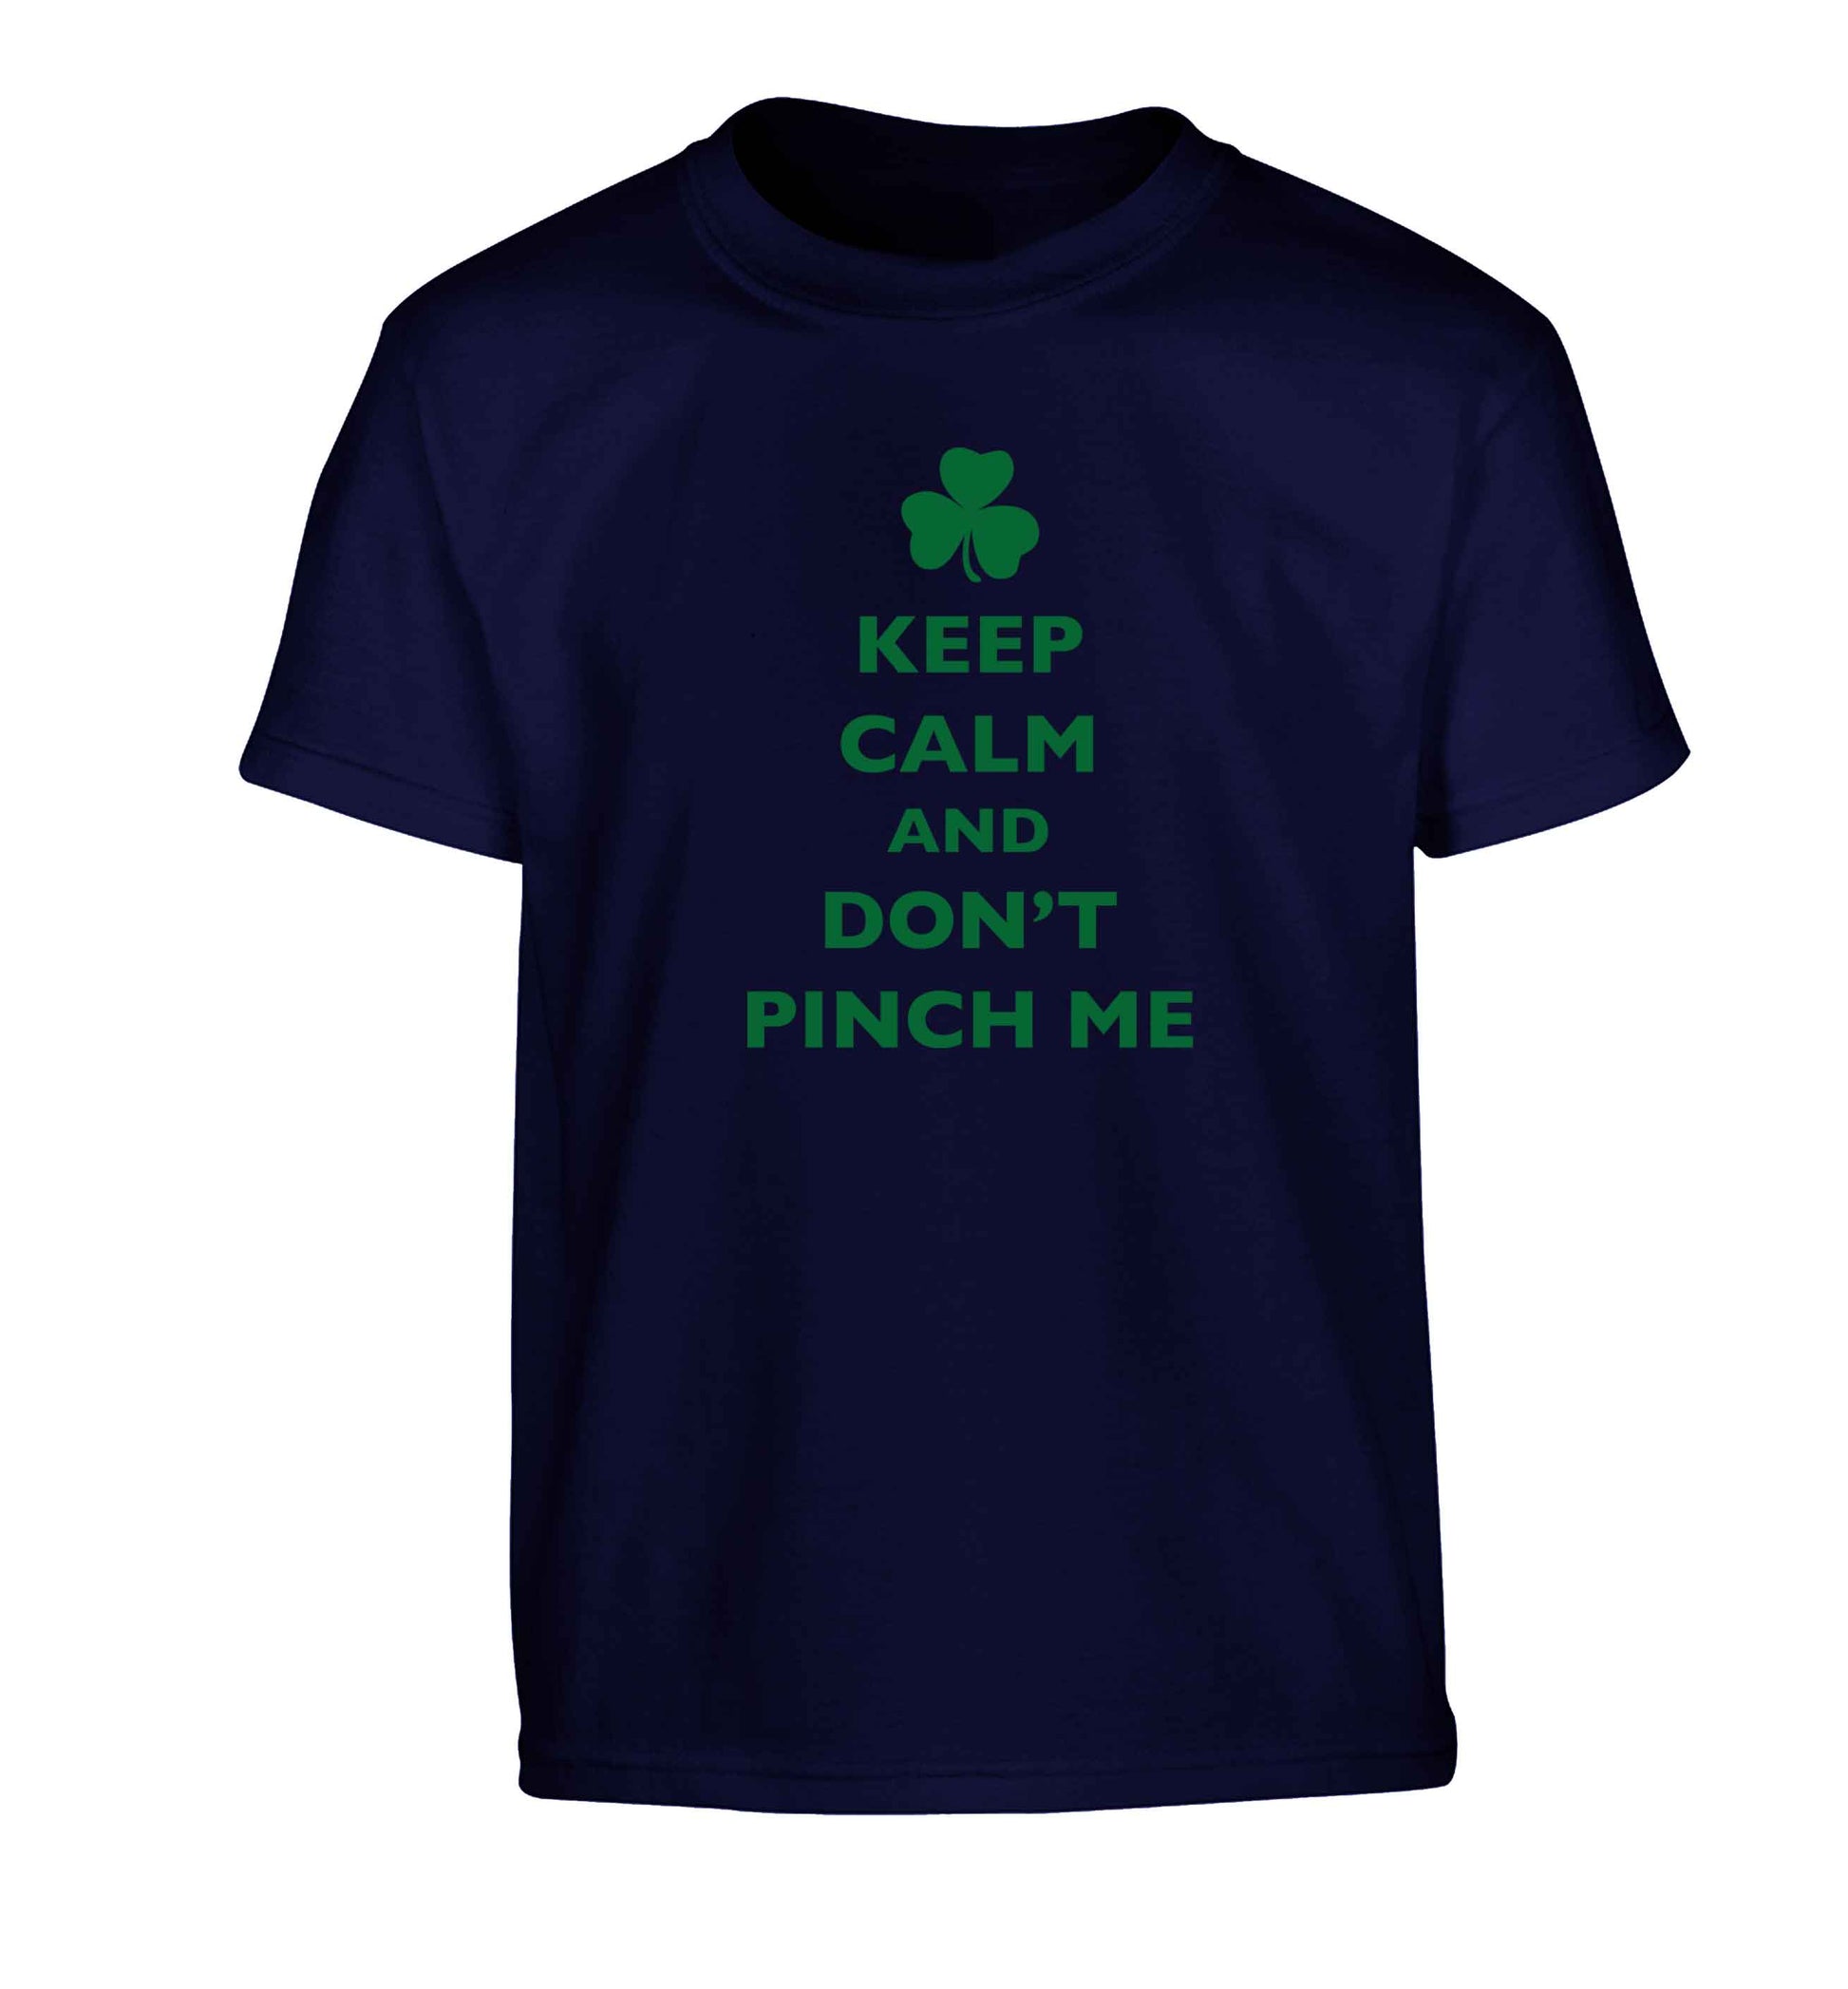 Keep calm and don't pinch me Children's navy Tshirt 12-13 Years